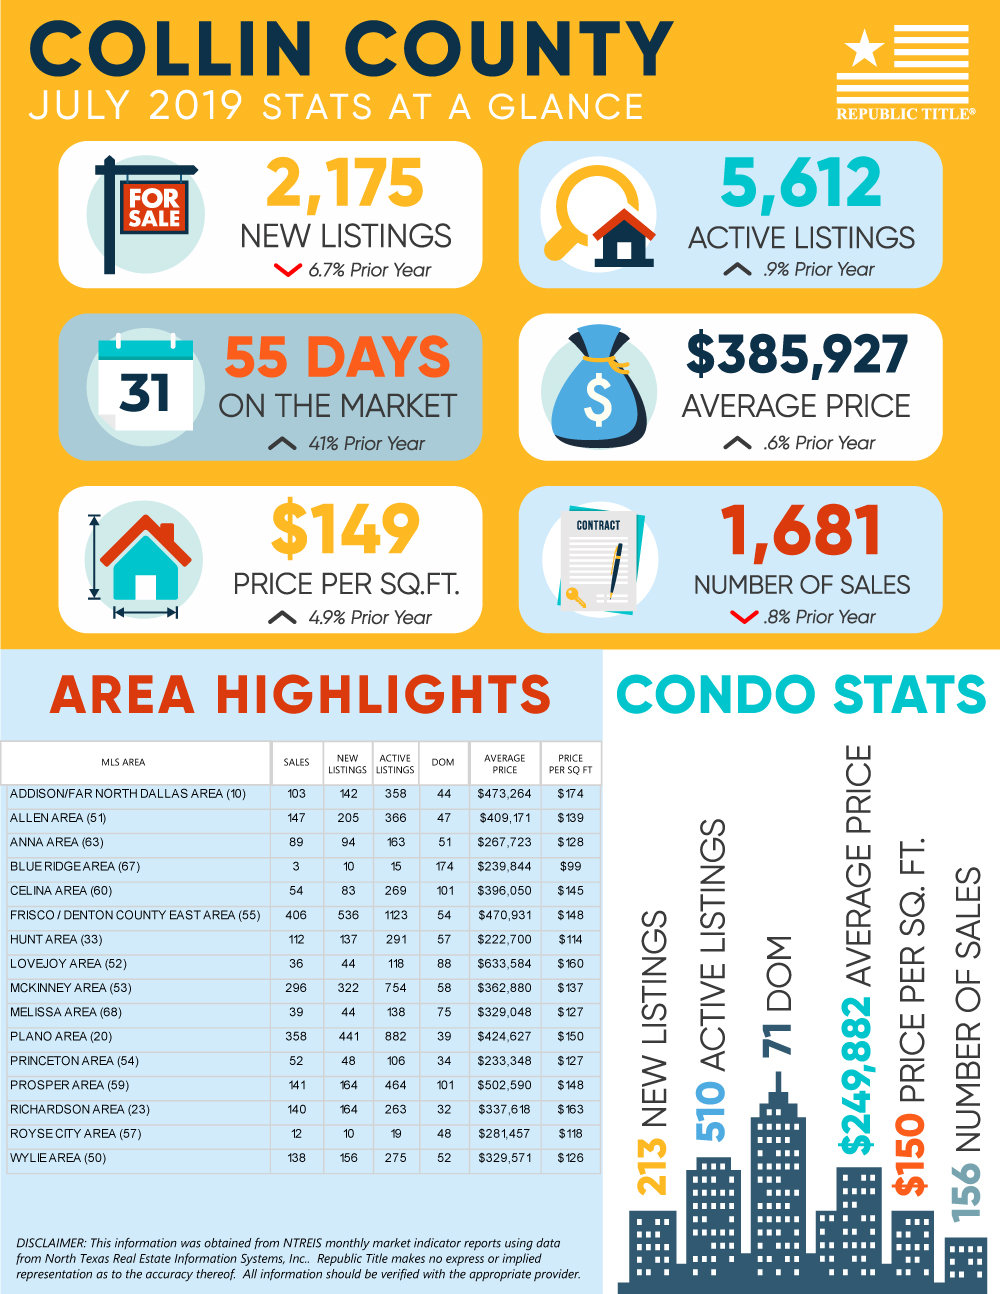 Collin County Housing Market Update - Home and Condo Stats July 2019